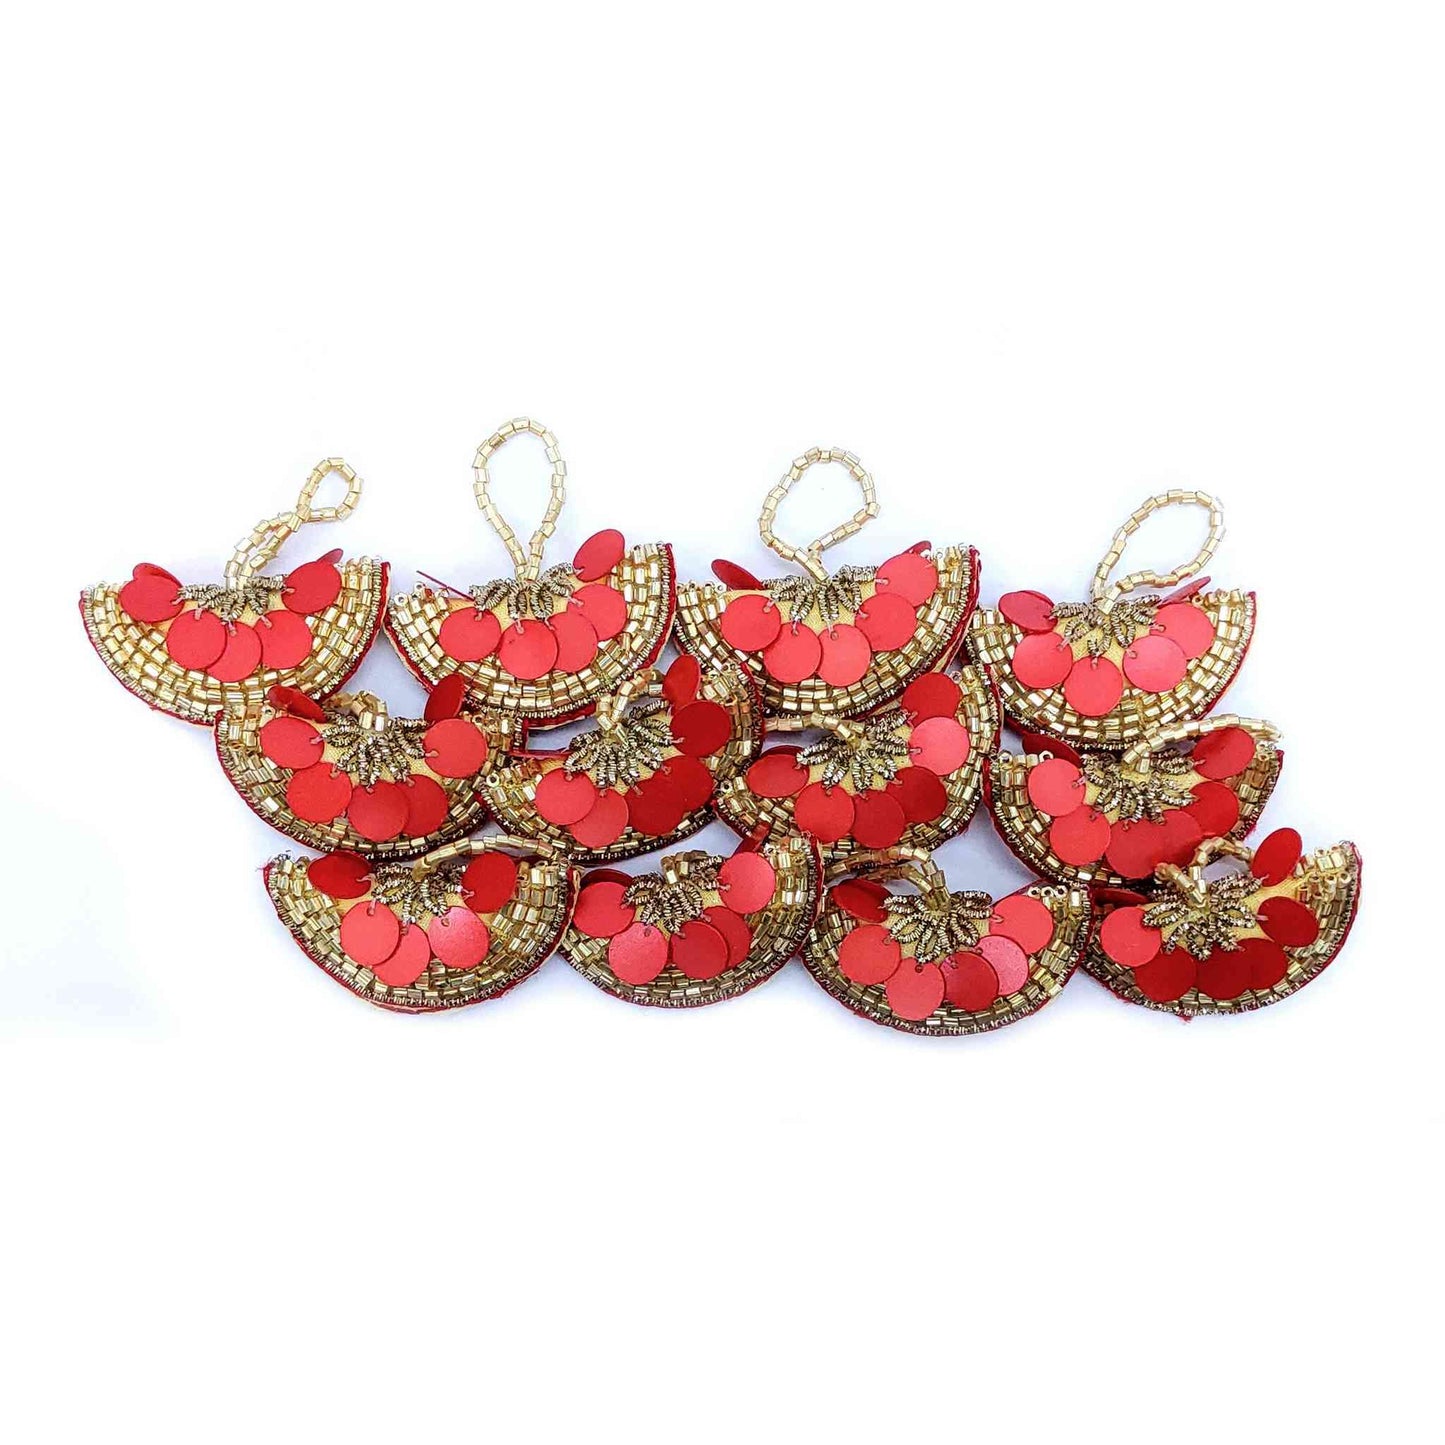 Designer Sequence Latkan Buti for DIY Craft, Trouseau Packing or Decoration (Bunch of 12) - Design 201, Red - Indian Petals